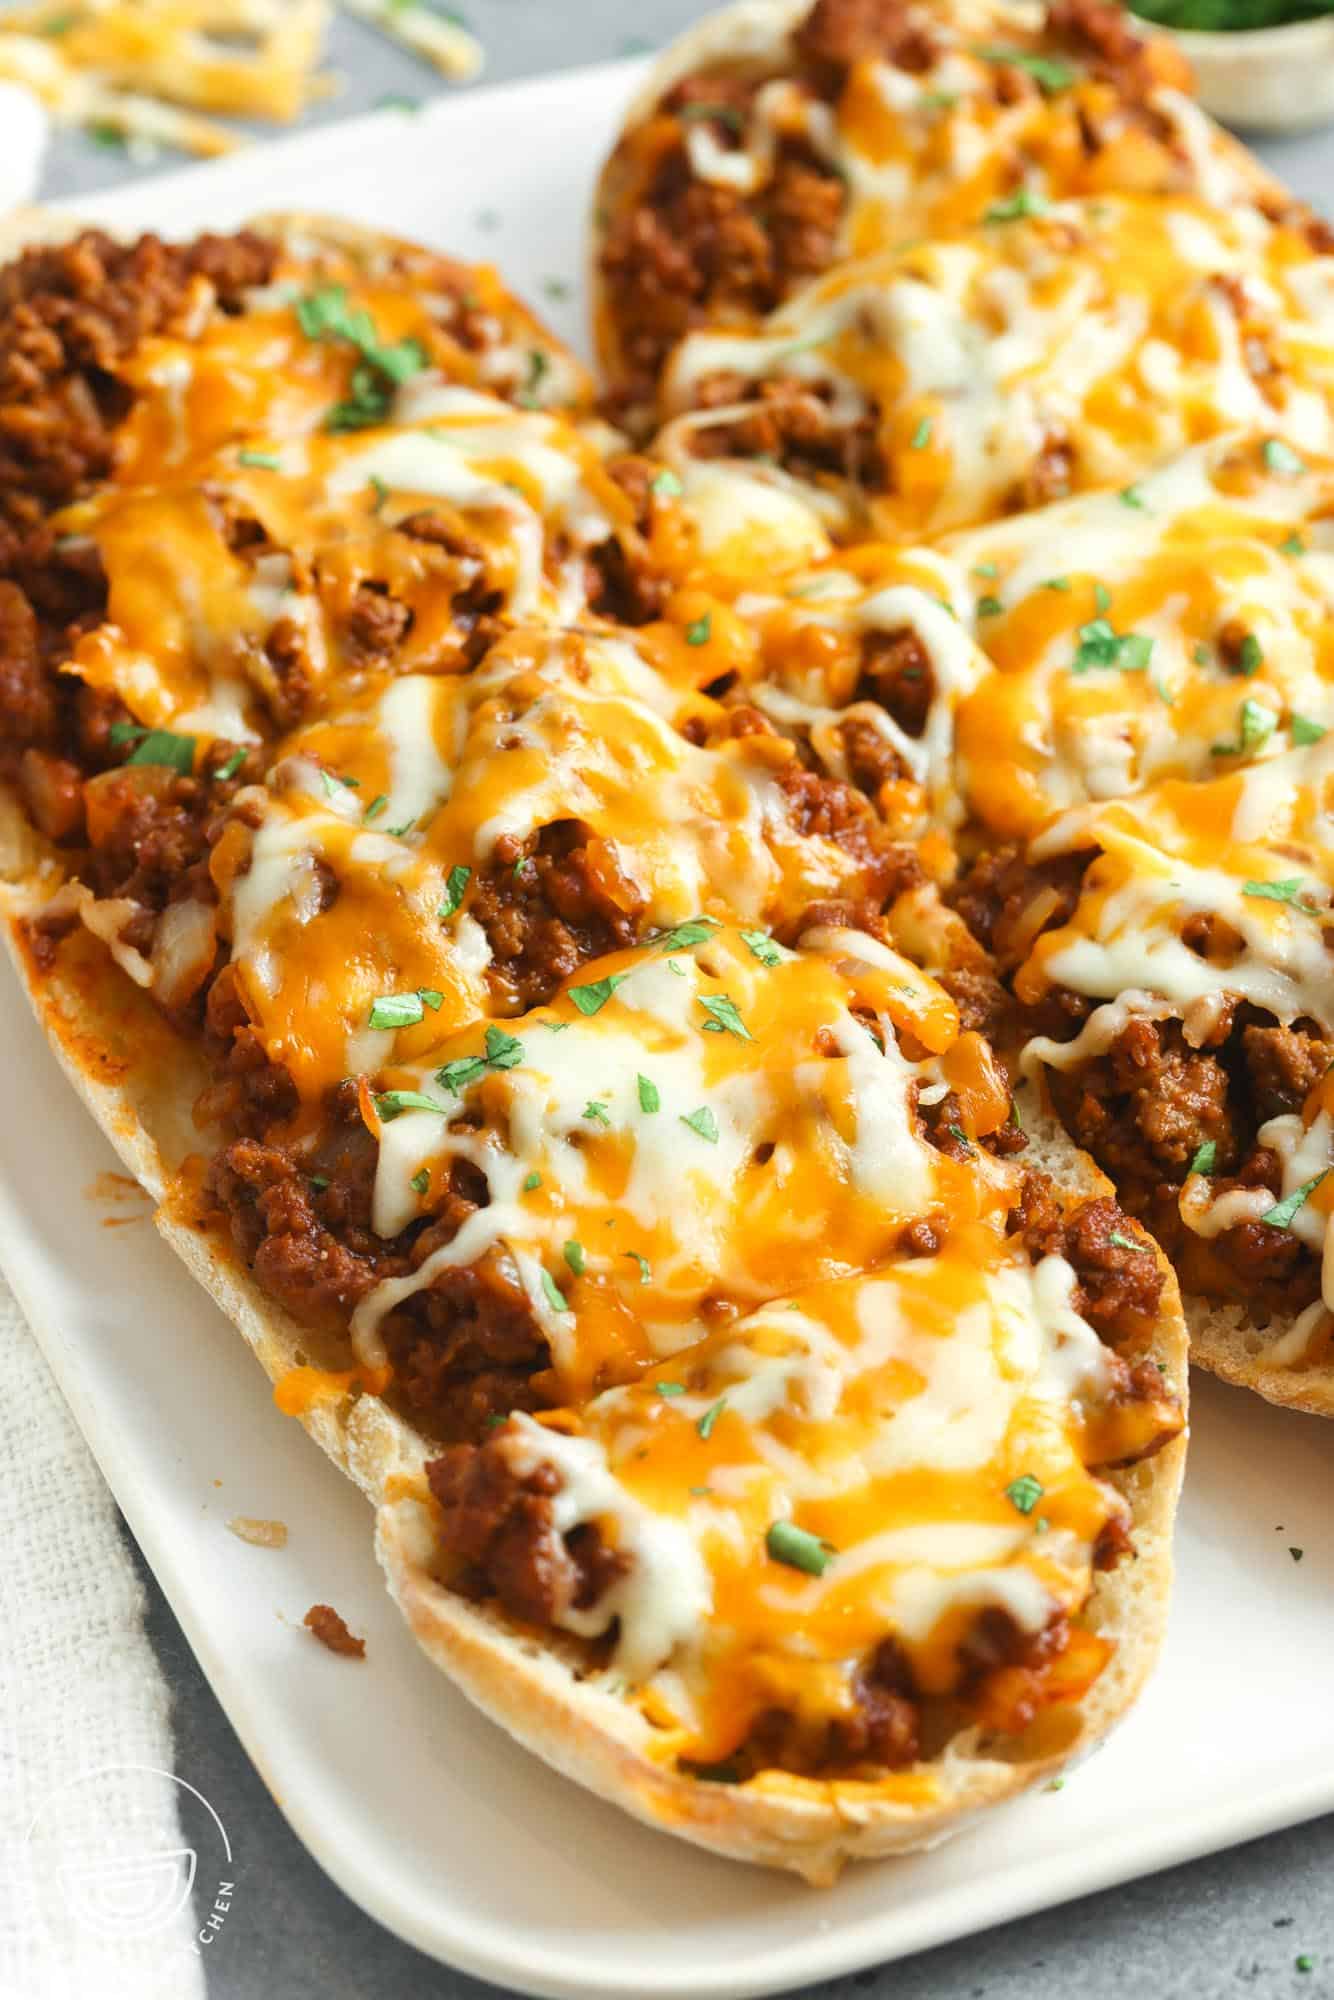 two large pieces of ciabatta topped with sloppy joe meat and melted cheese